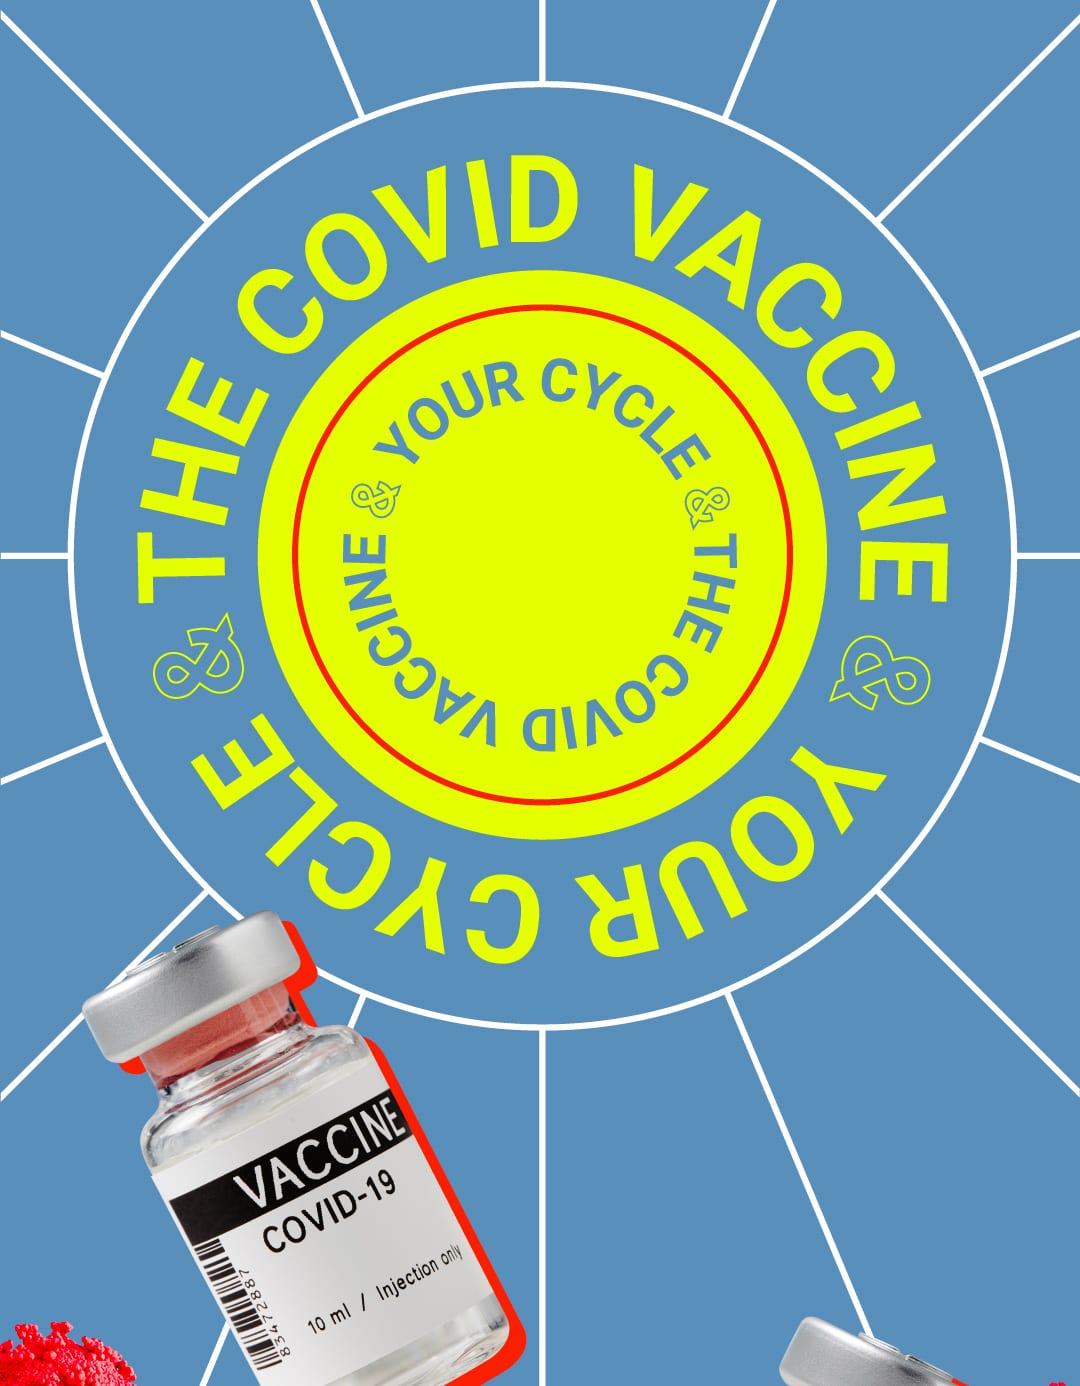 Ask an OB/GYN: Does the Covid vaccine affect the menstrual cycle?